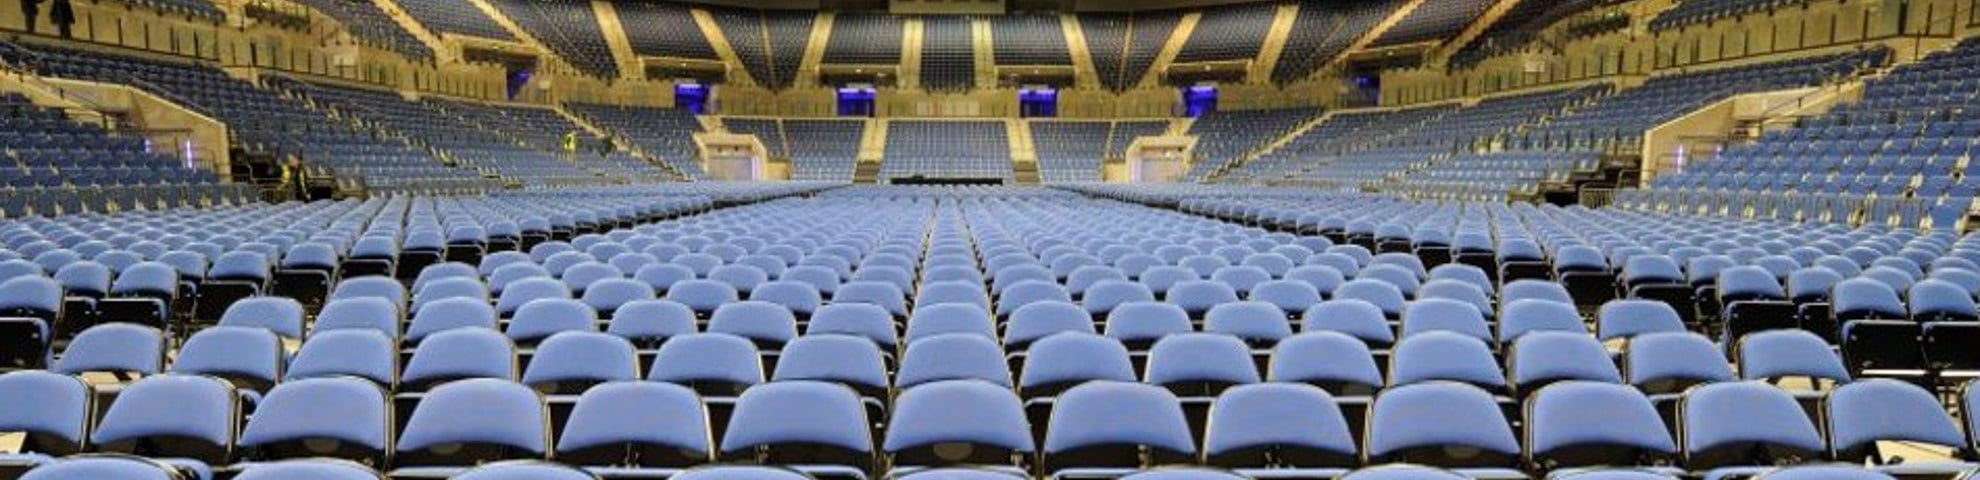 The interior of the arena. There is a number of blue seats. 